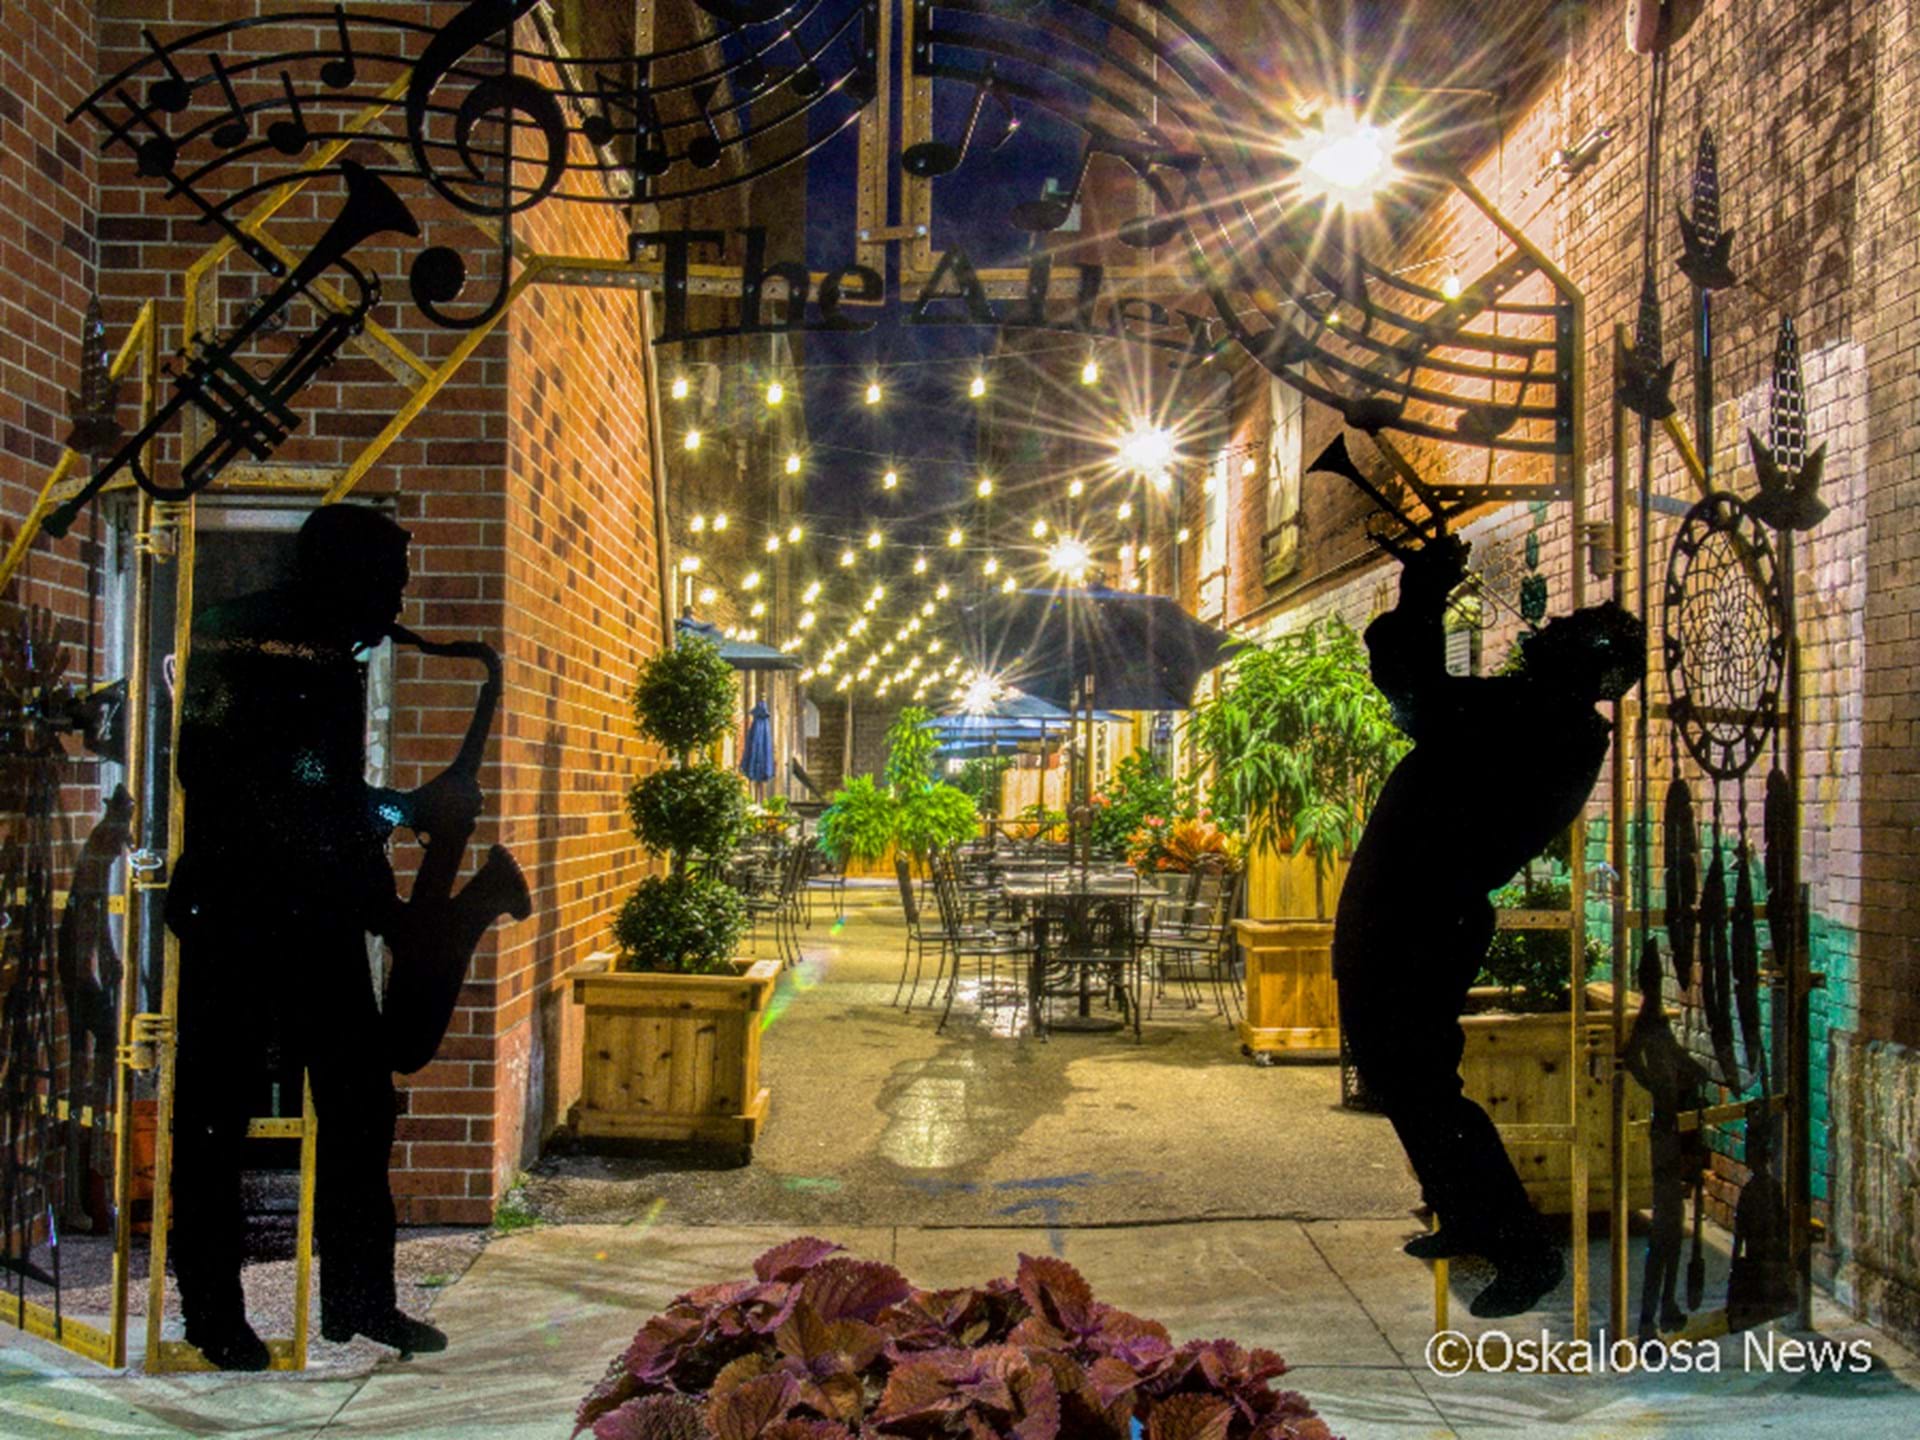 The Alley in Downtown Oskaloosa